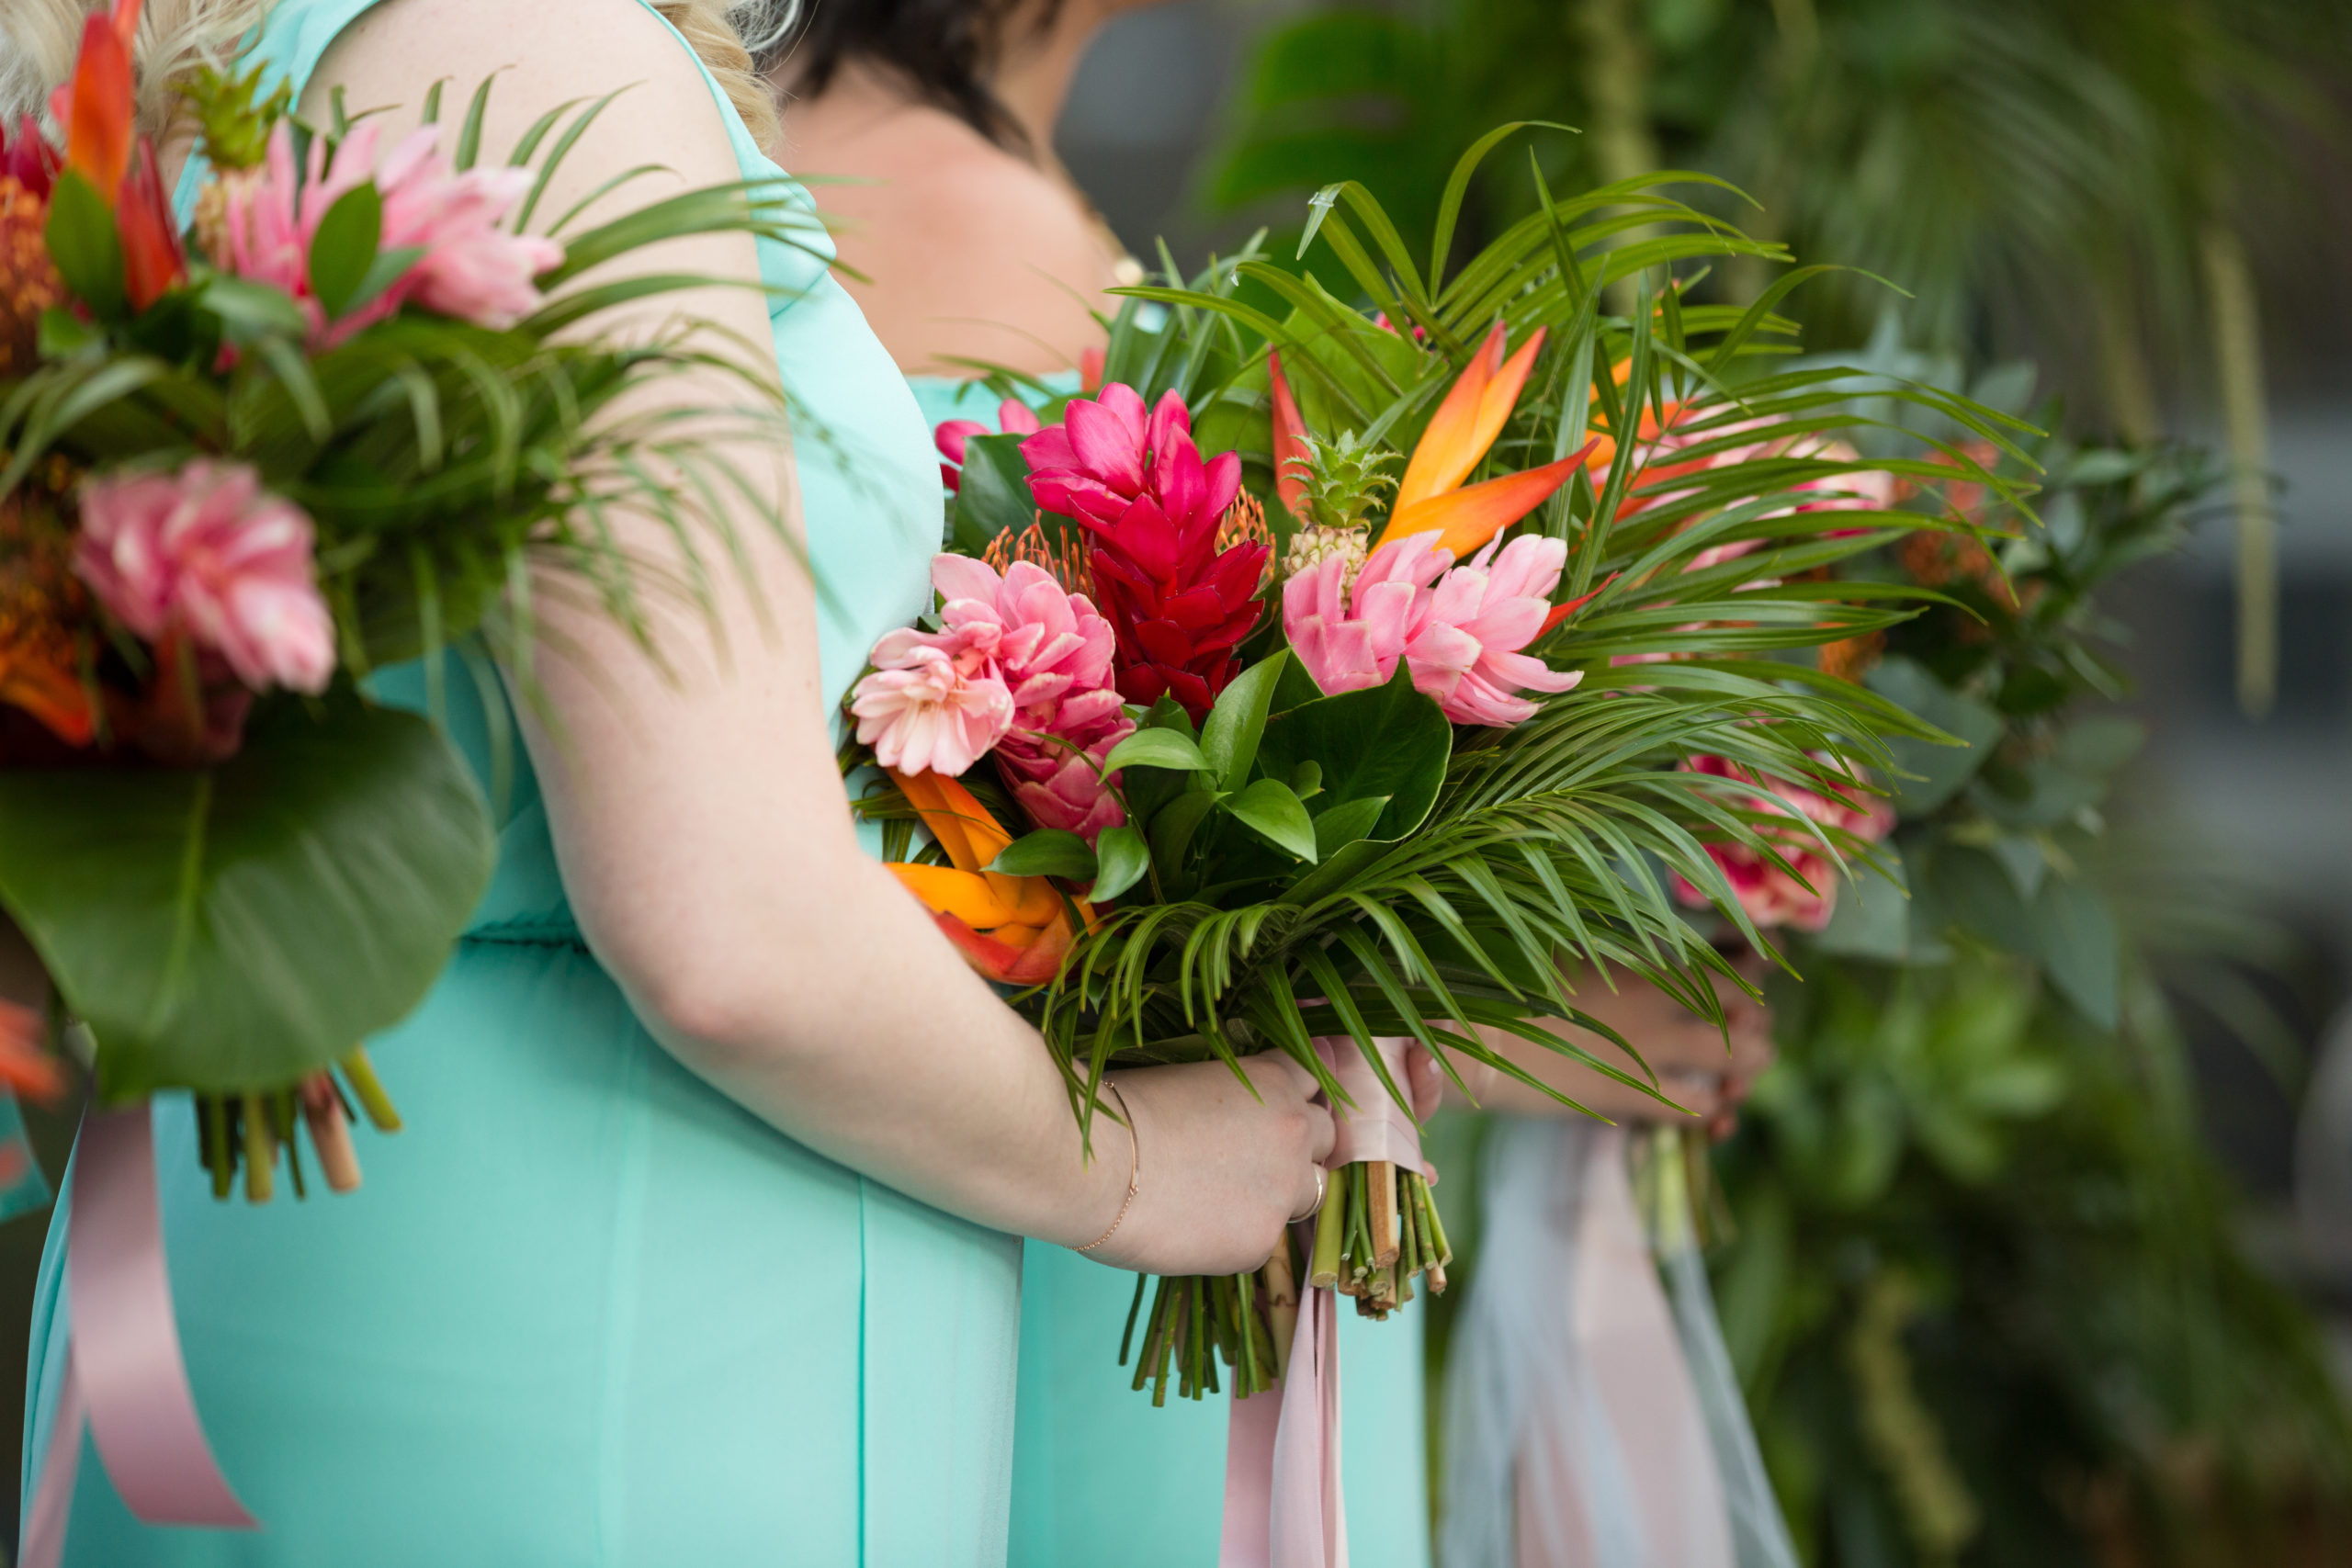 The bridesmaids carry tropical bouquets filled with monstera leaves, banana leaves, protea, birds of paradise, pineapples, and other tropical flowers